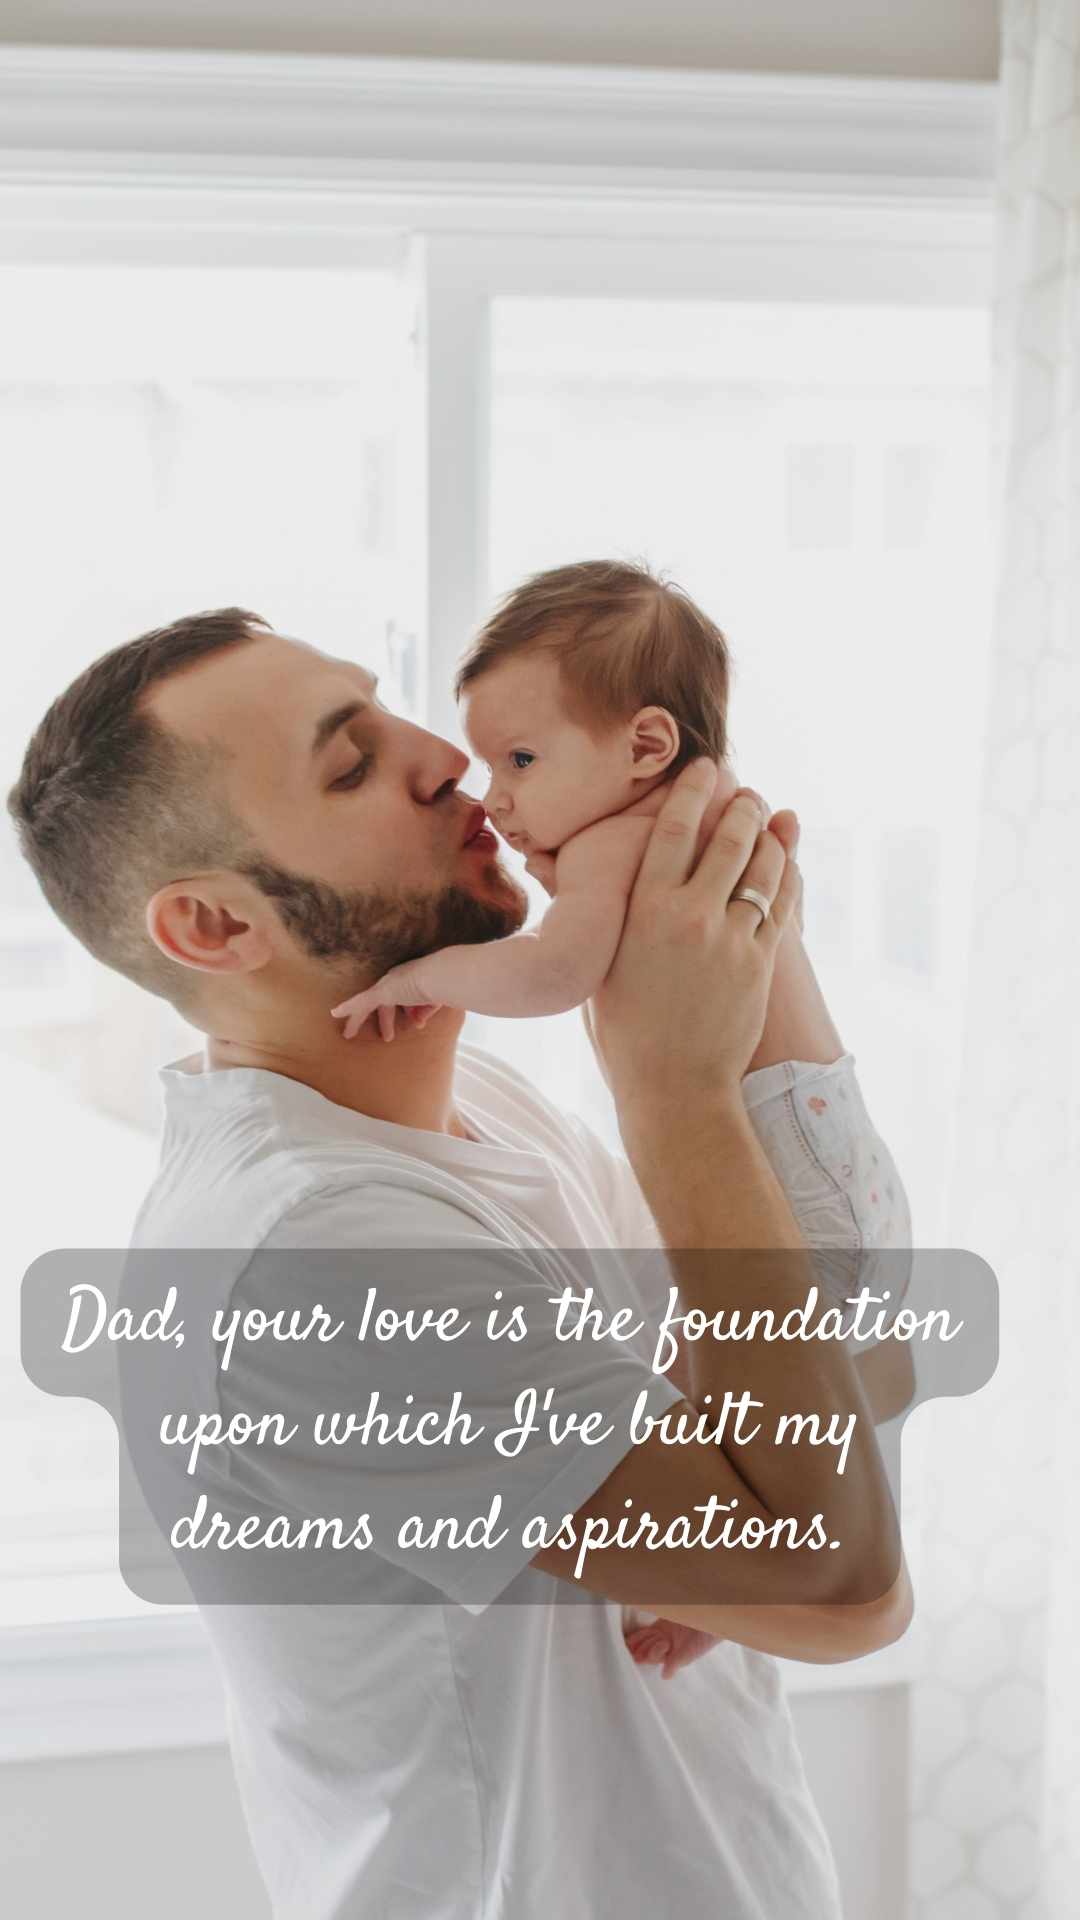 Quote: 'Dad, your love is the foundation upon which I've built my dreams and aspirations.'